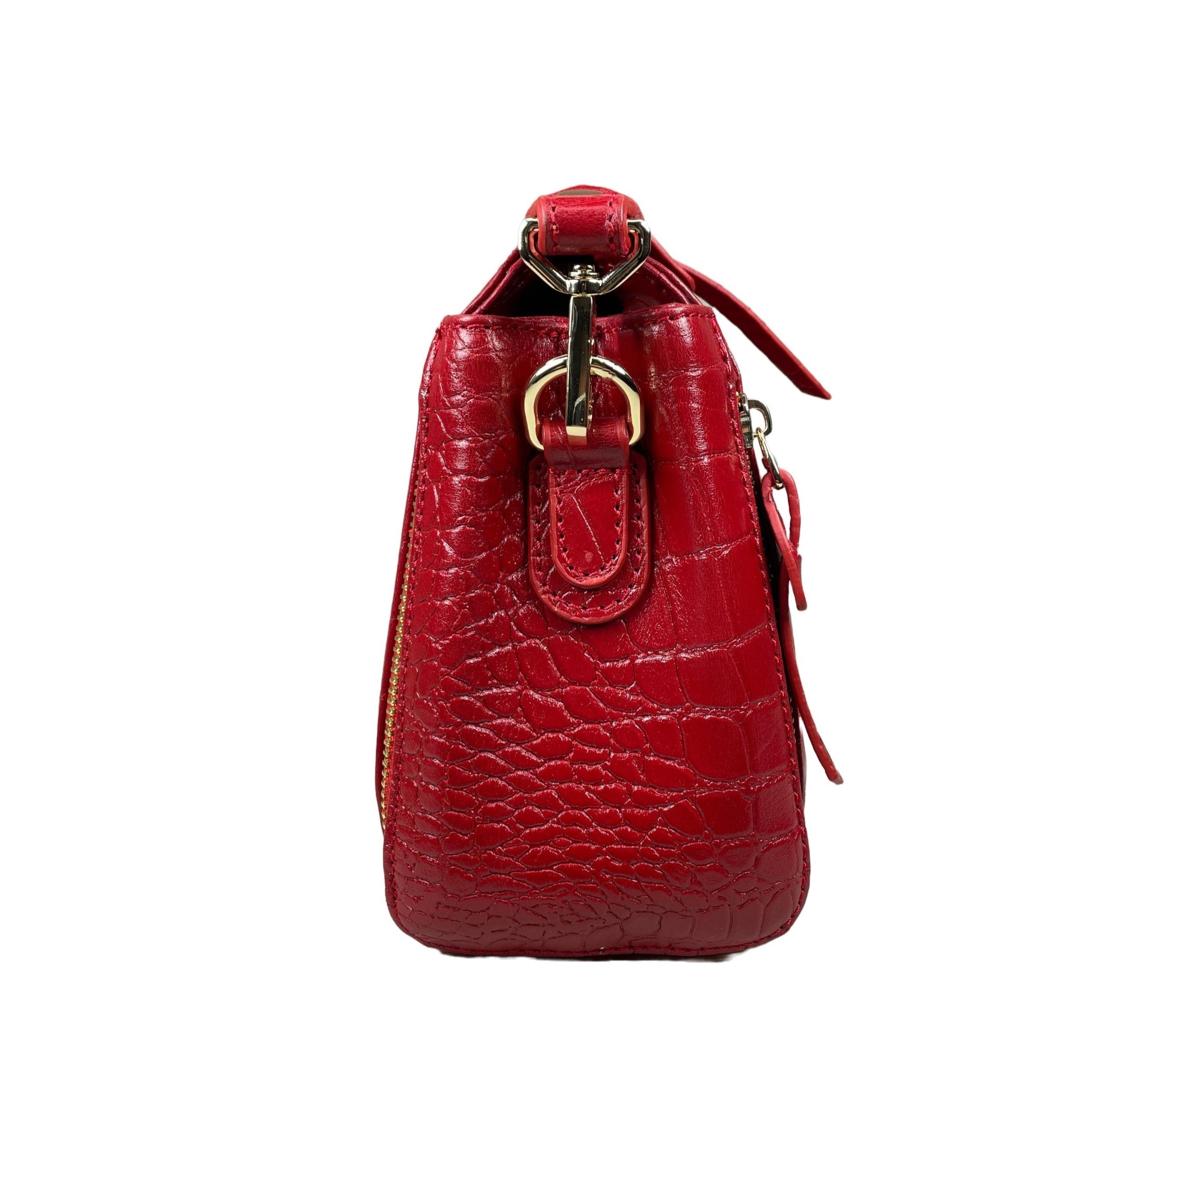 LeatherLuxe - Red Leather Handbag Shoulder Bag for Women; Crocodile Style Genuine leather Designer Premium leather bag for women leather hobo tote messenger bag Leather Accessories Leather Shop Leather Goods